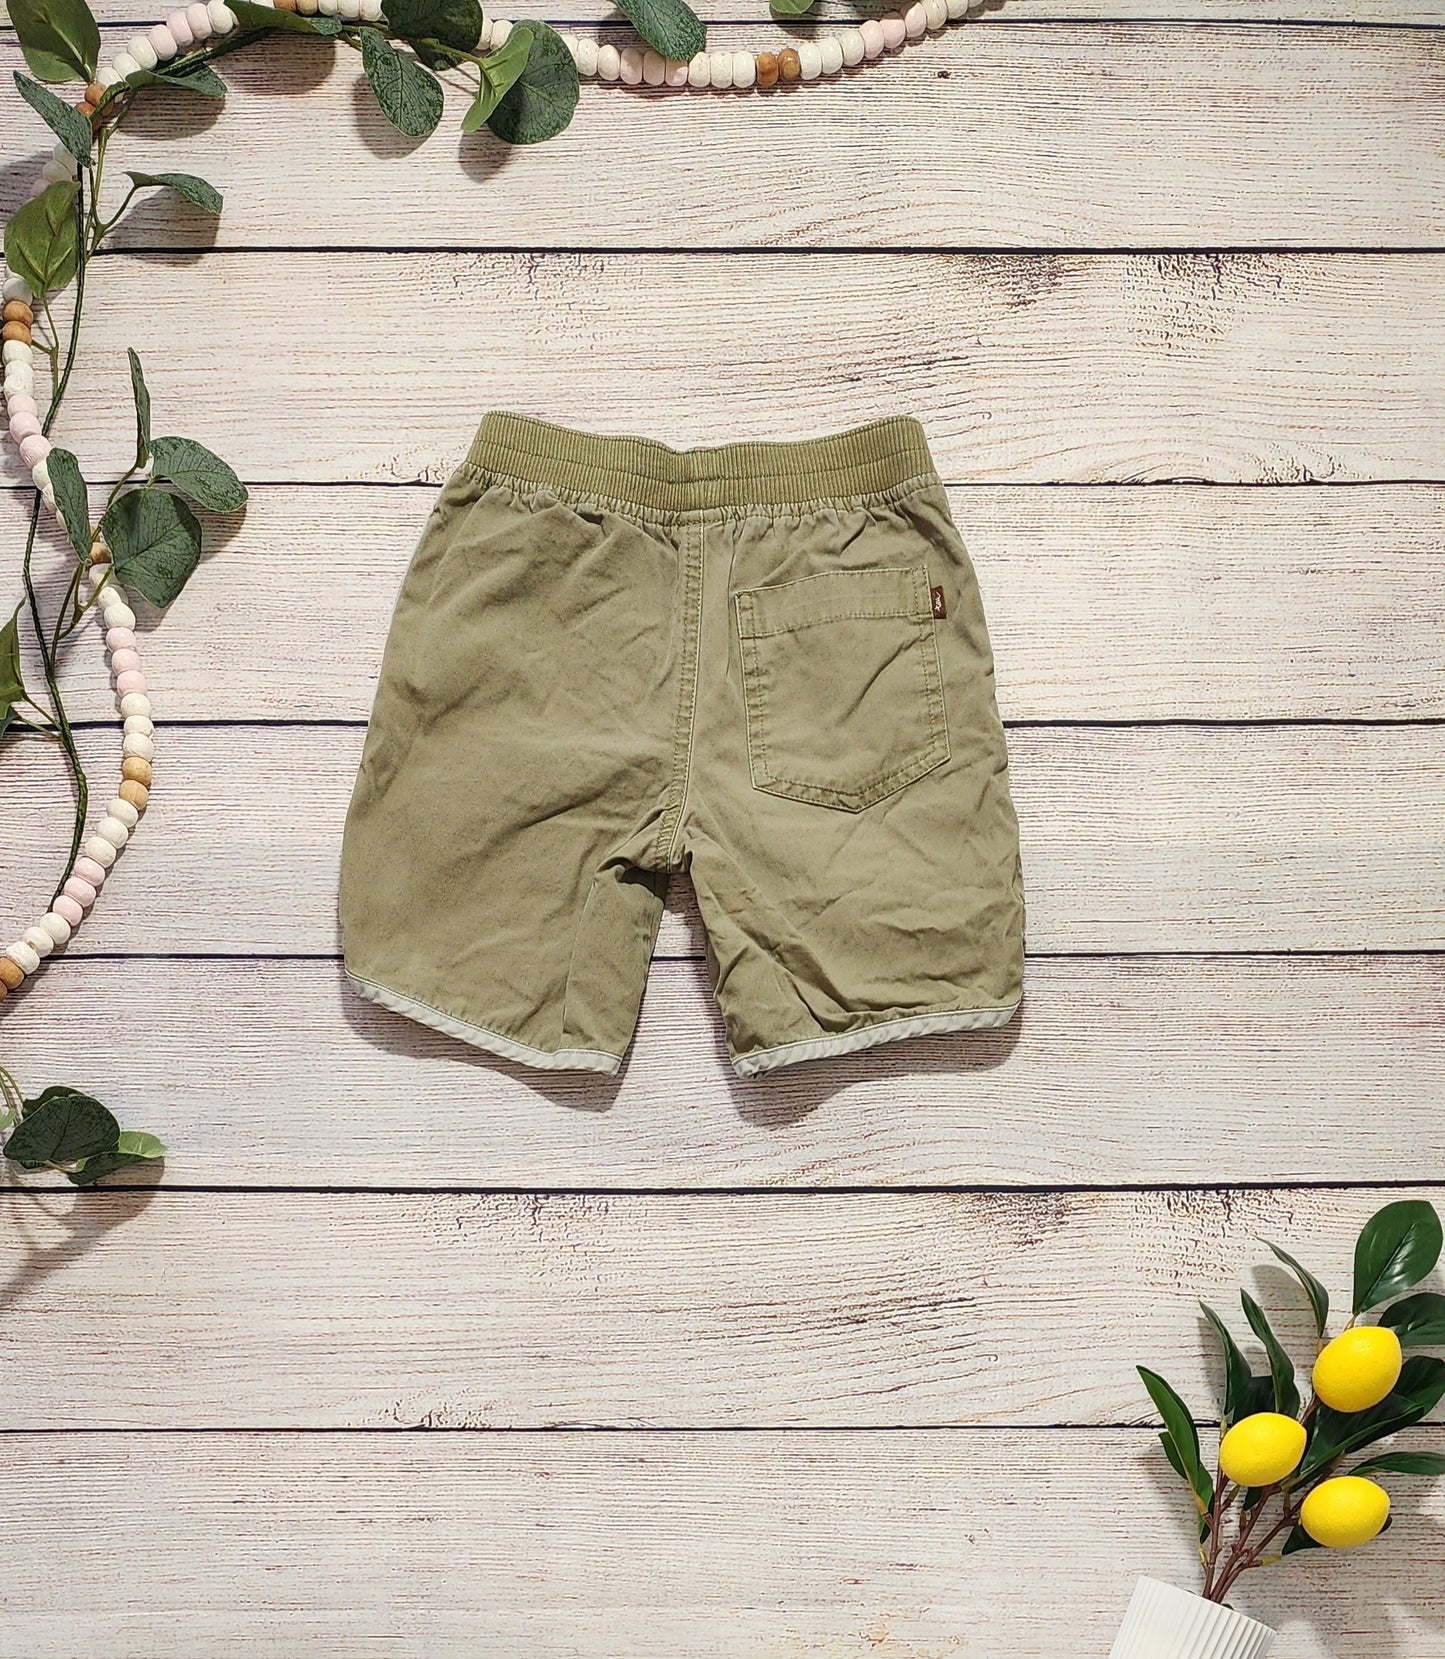 Tea Collection Shorts, Size 4